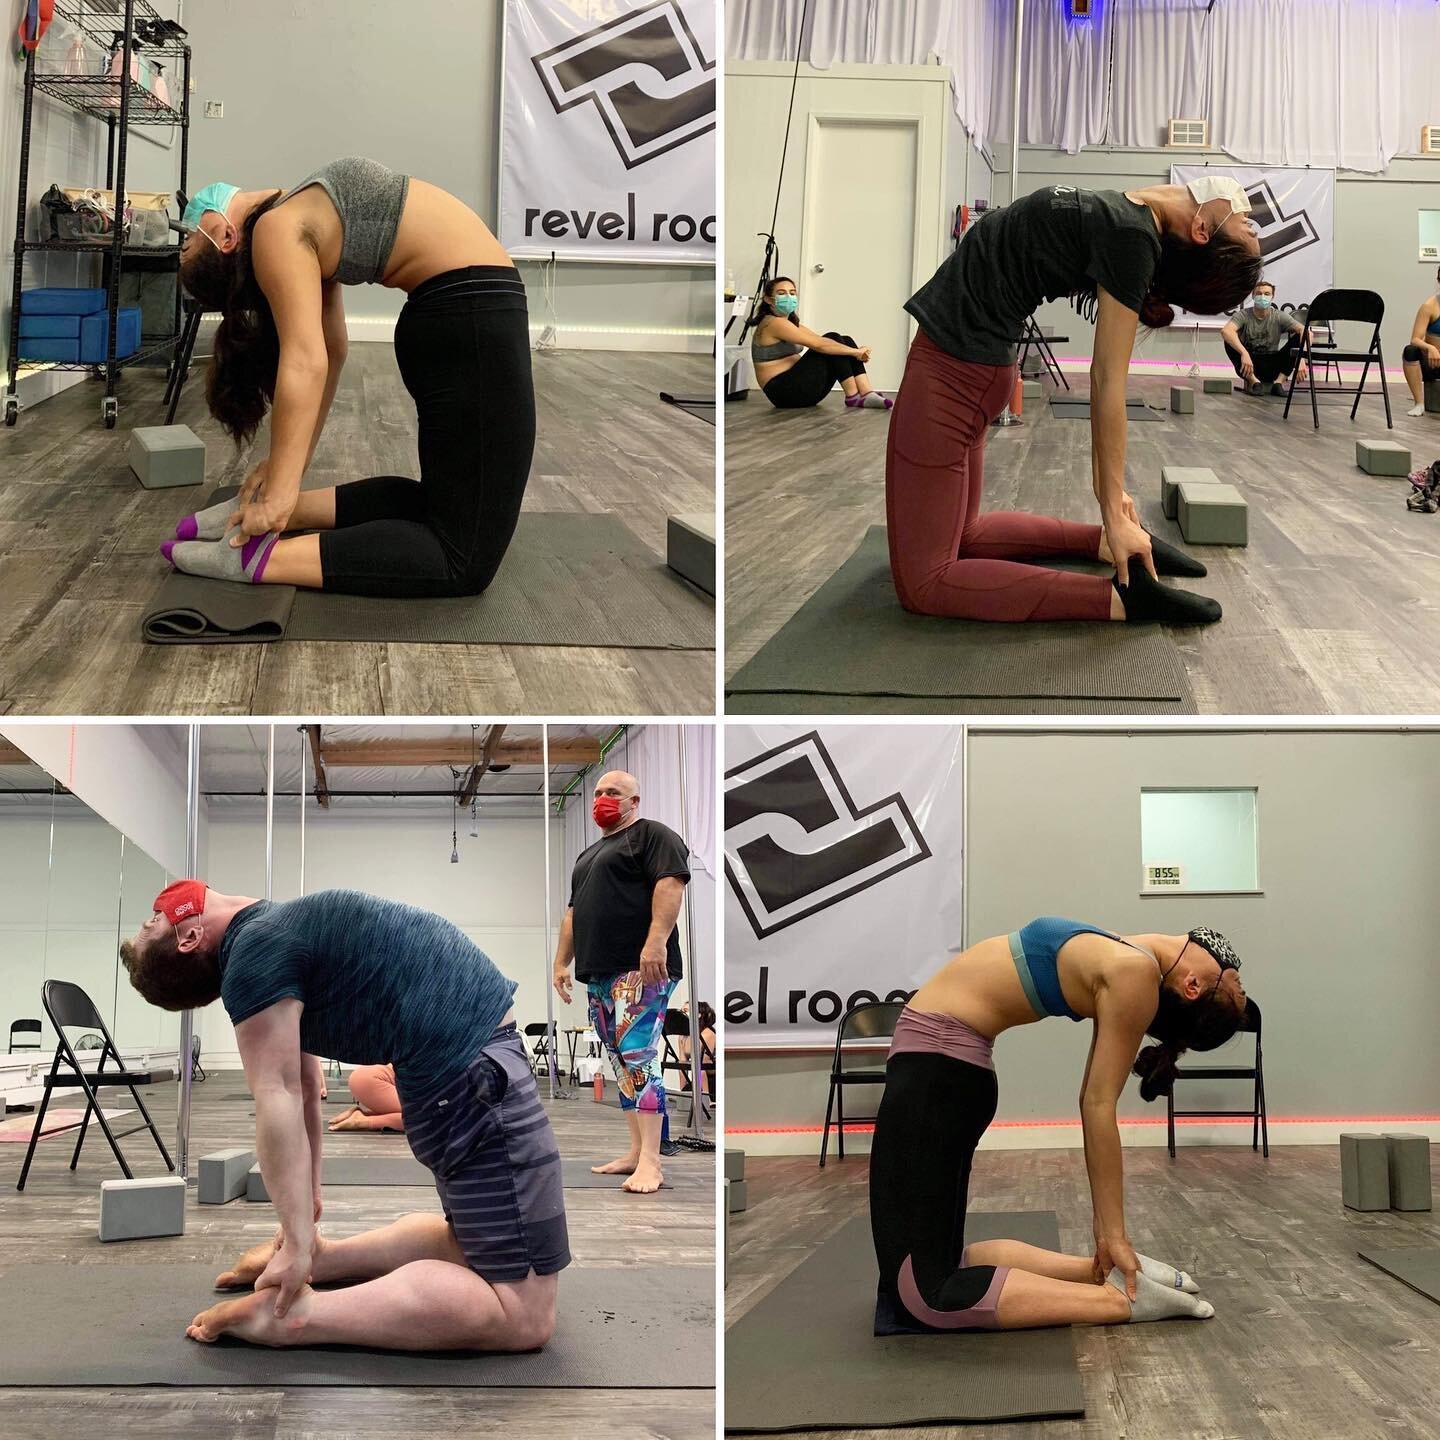 🐪These camels have been looking extra tall lately!

Come get flexy with us every Thursday at 7:30!

#activeflexibility #flexibilitytraining #flexible #camel #backbend #backflexibility #strongandbendy #activeflex #strength #flexibility #revelroomstud